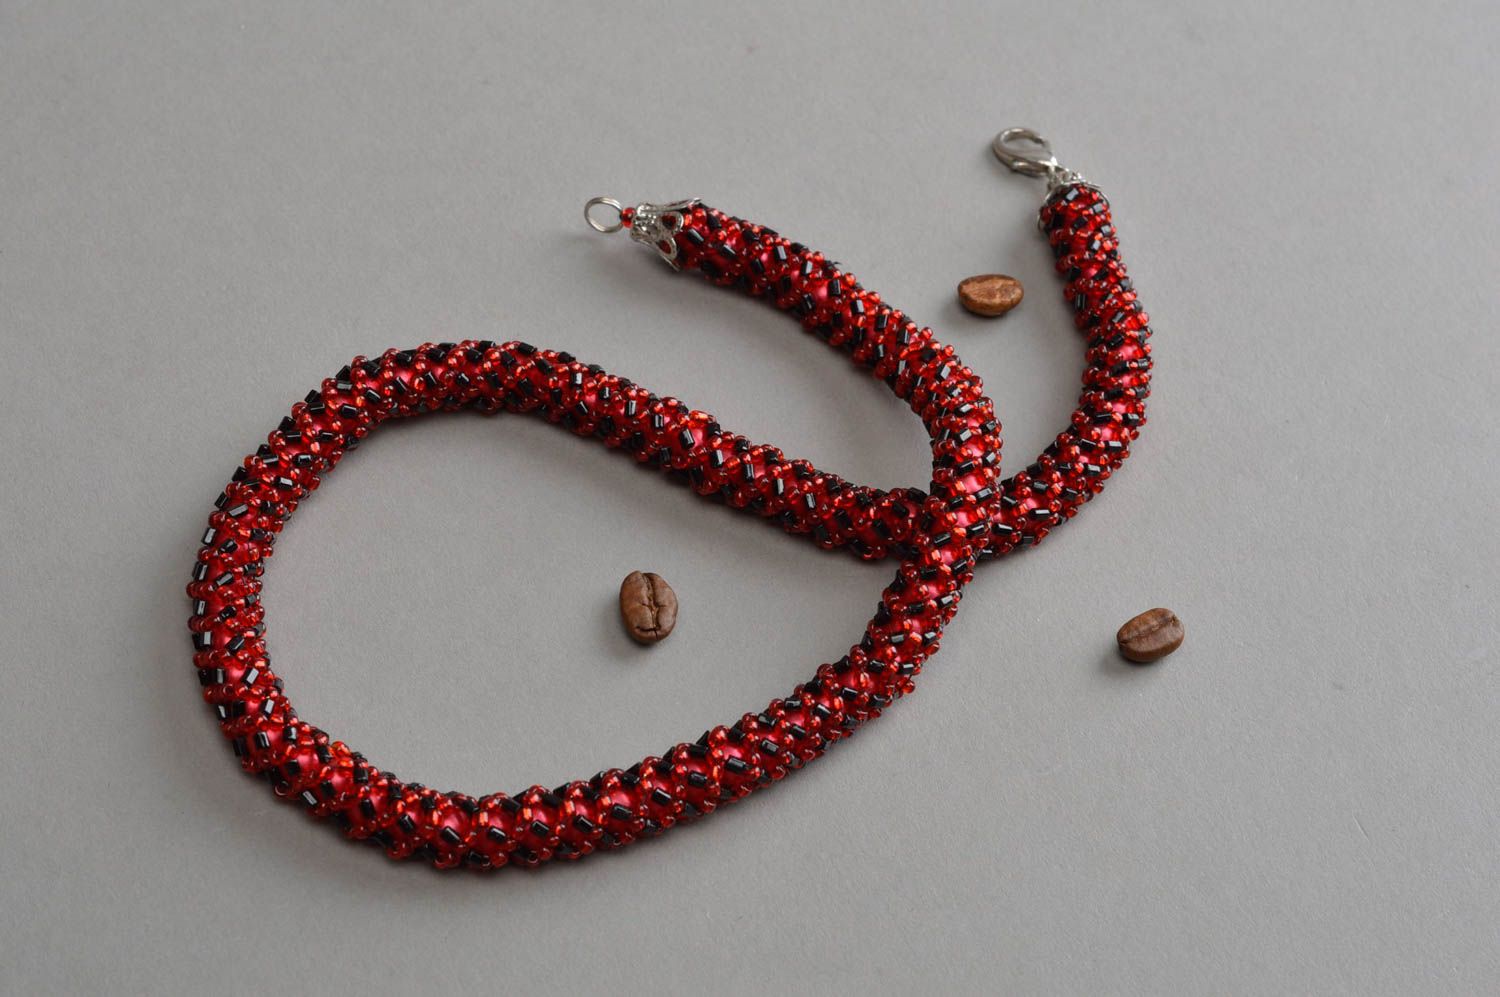 Stylish handmade beaded cord necklace unusual necklace designs womens jewelry photo 1